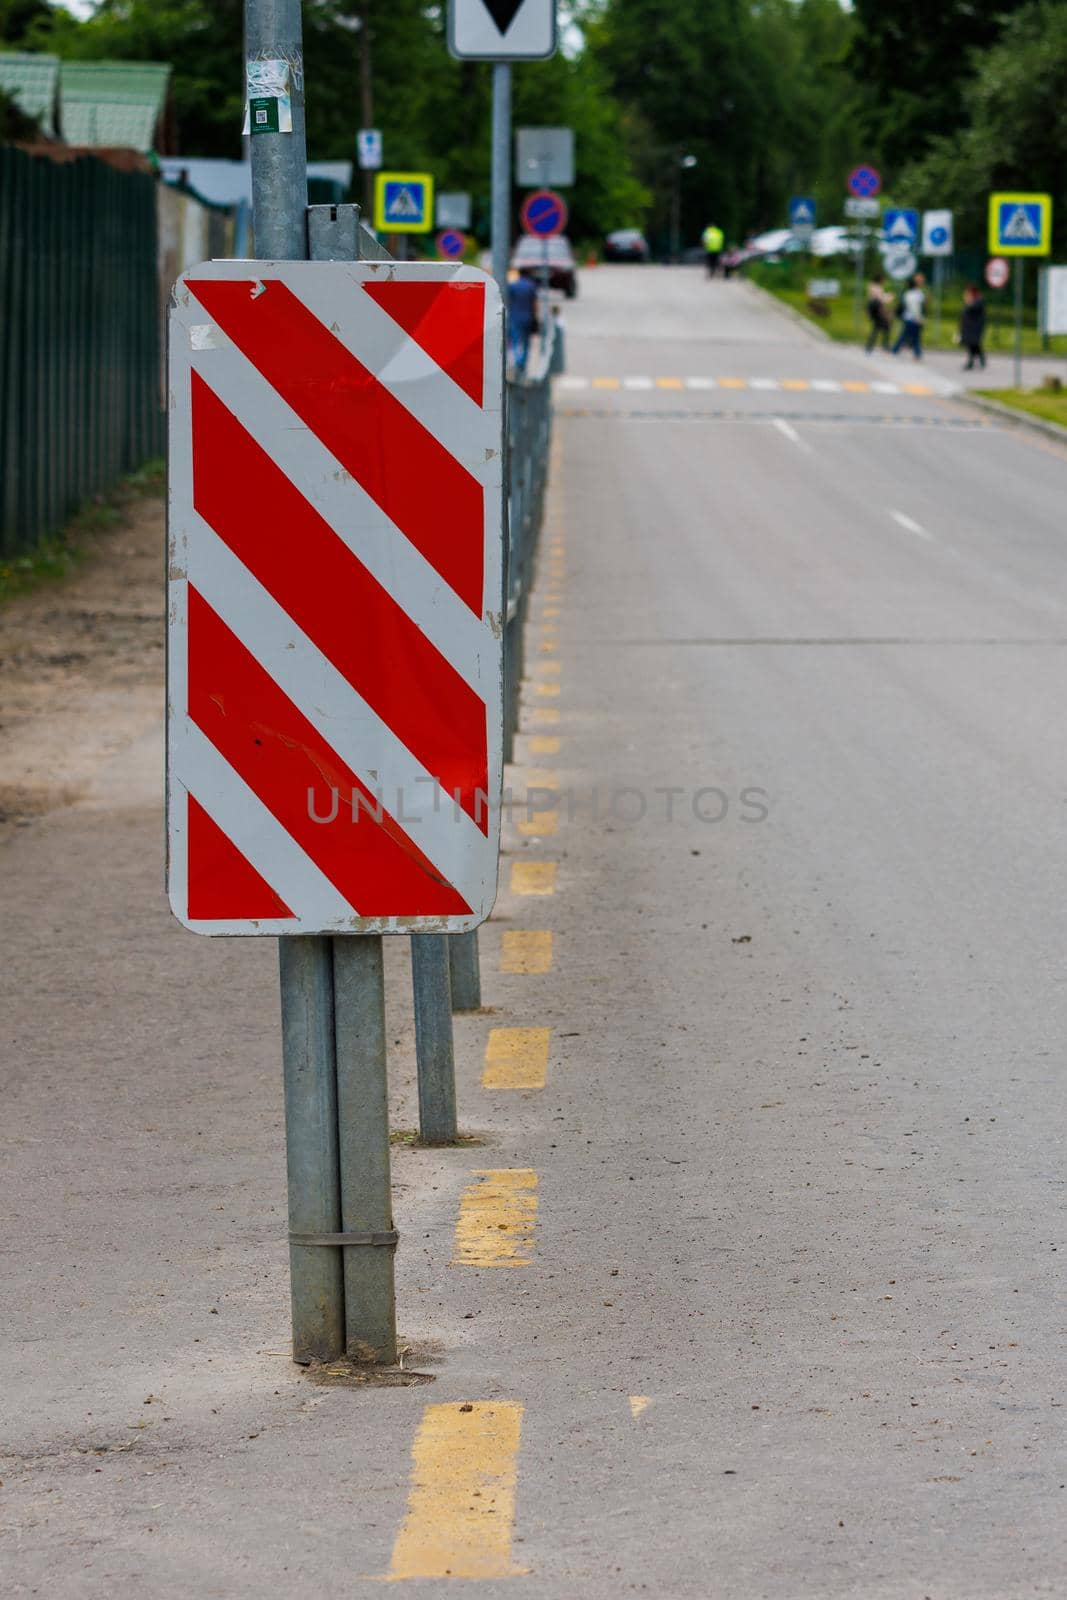 warning red and white diagonal striped vertical marking 8.22.2 sign at the end of road fence, separating road and